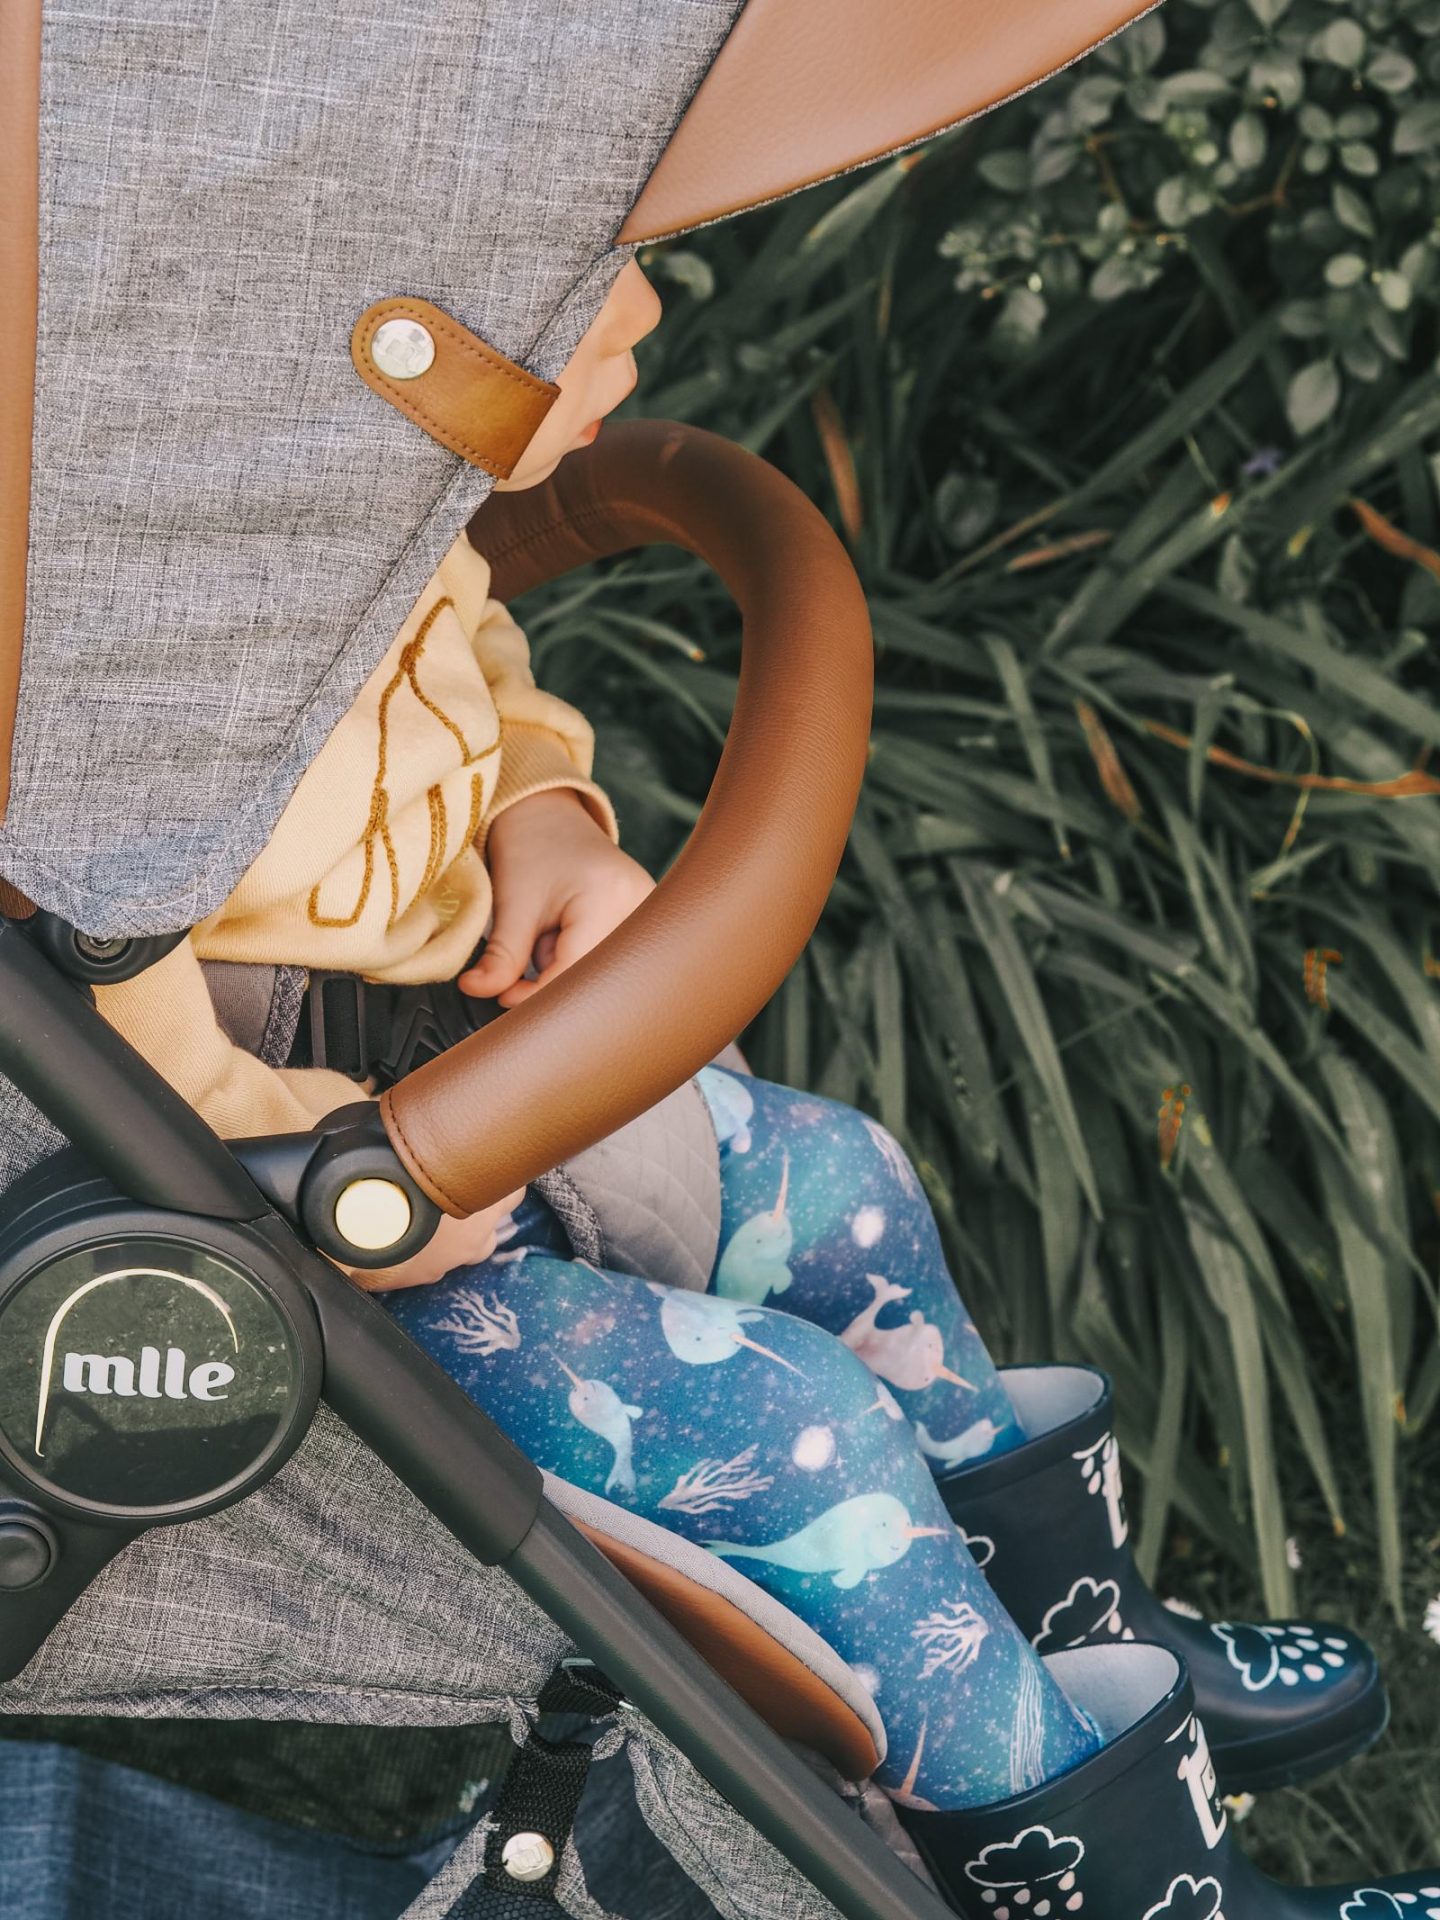 Mlle Baby Venture - An Earth Conscious Pushchair